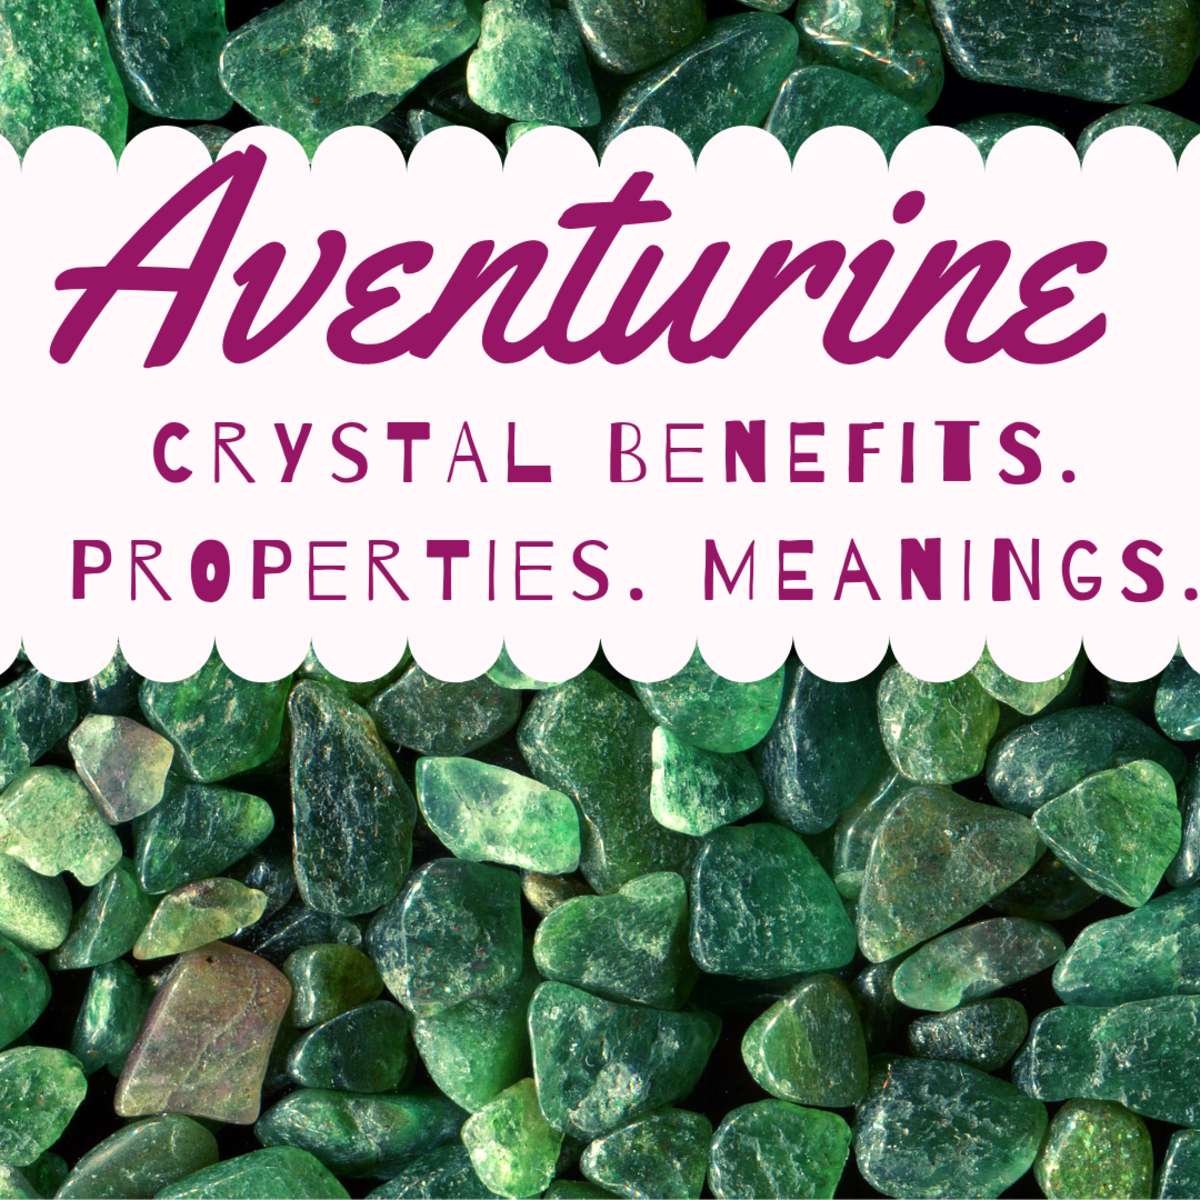 Aventurine Stone Benefits, Properties, and Meaning